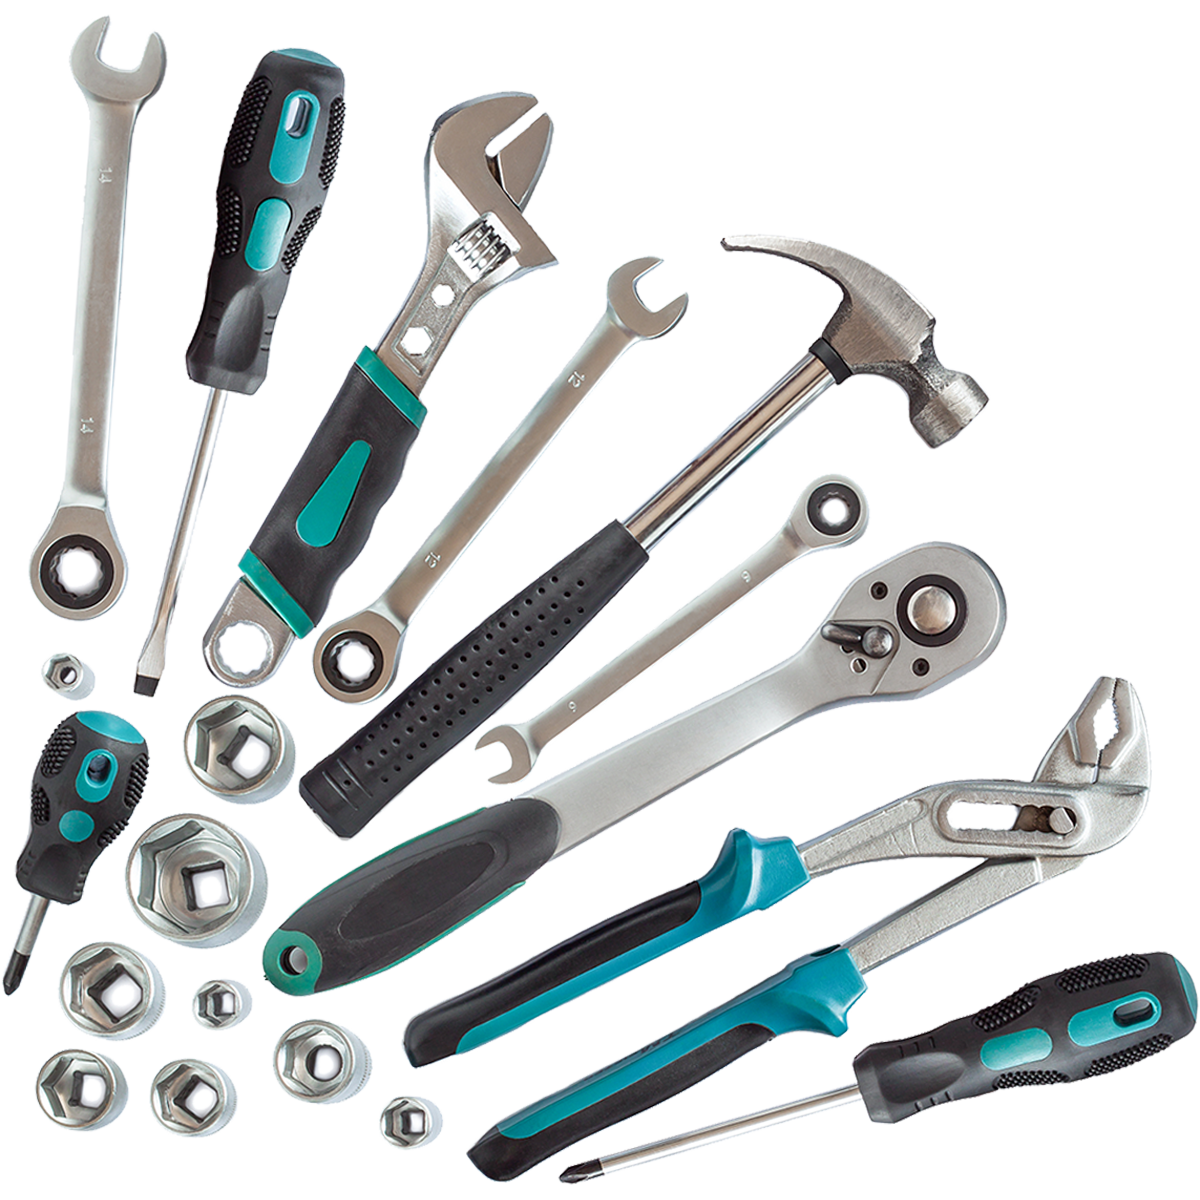 A comprehensive range of hand tools at competitive prices.